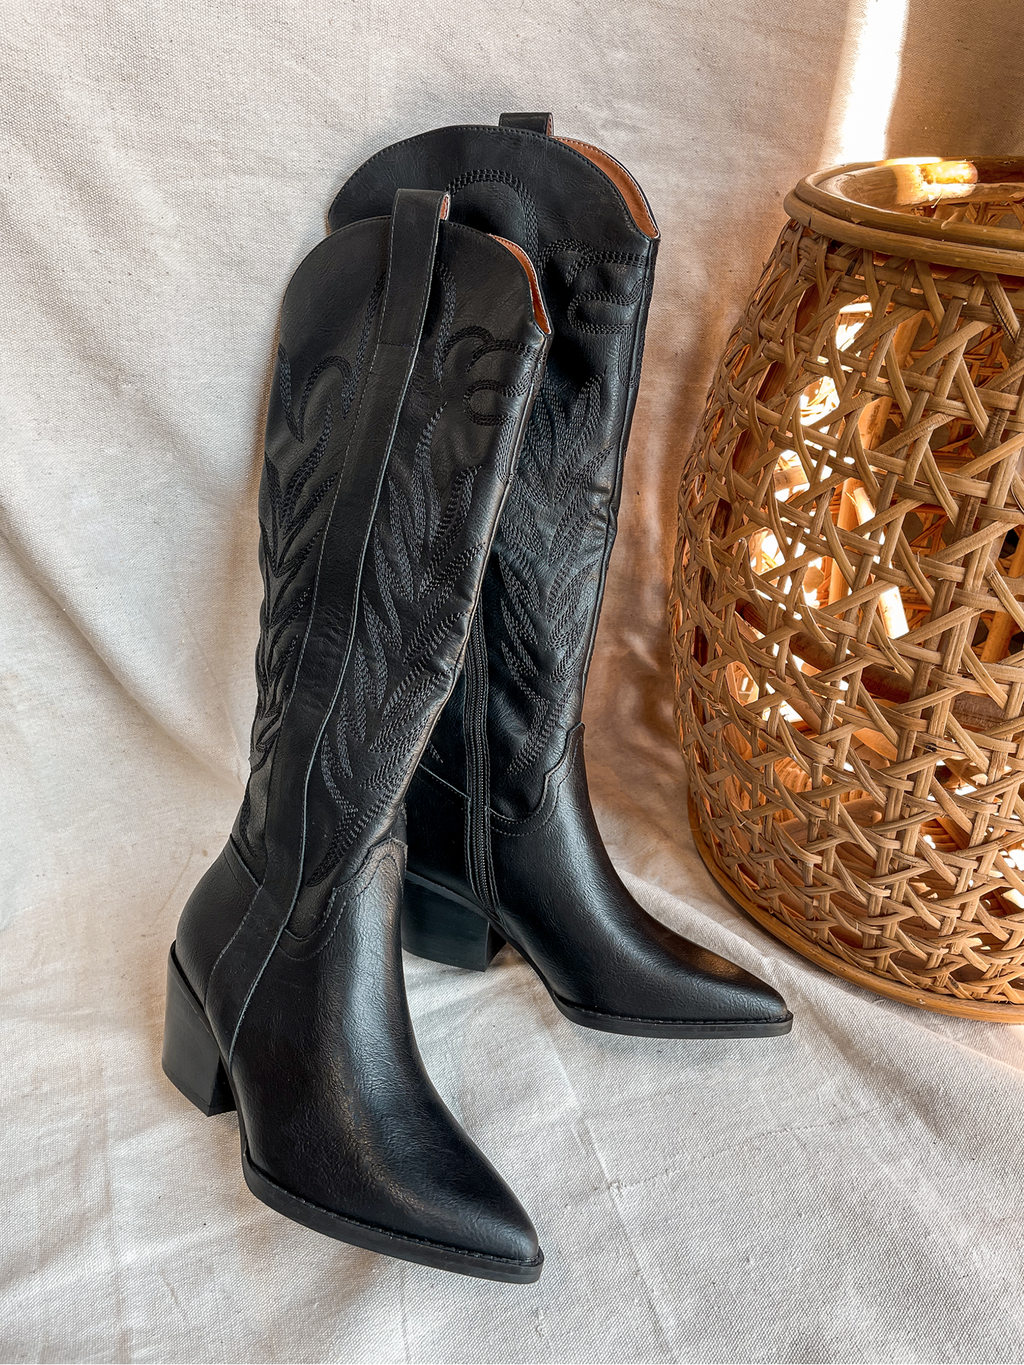 Samara Cowgirl Boot in Black - Stitch And Feather